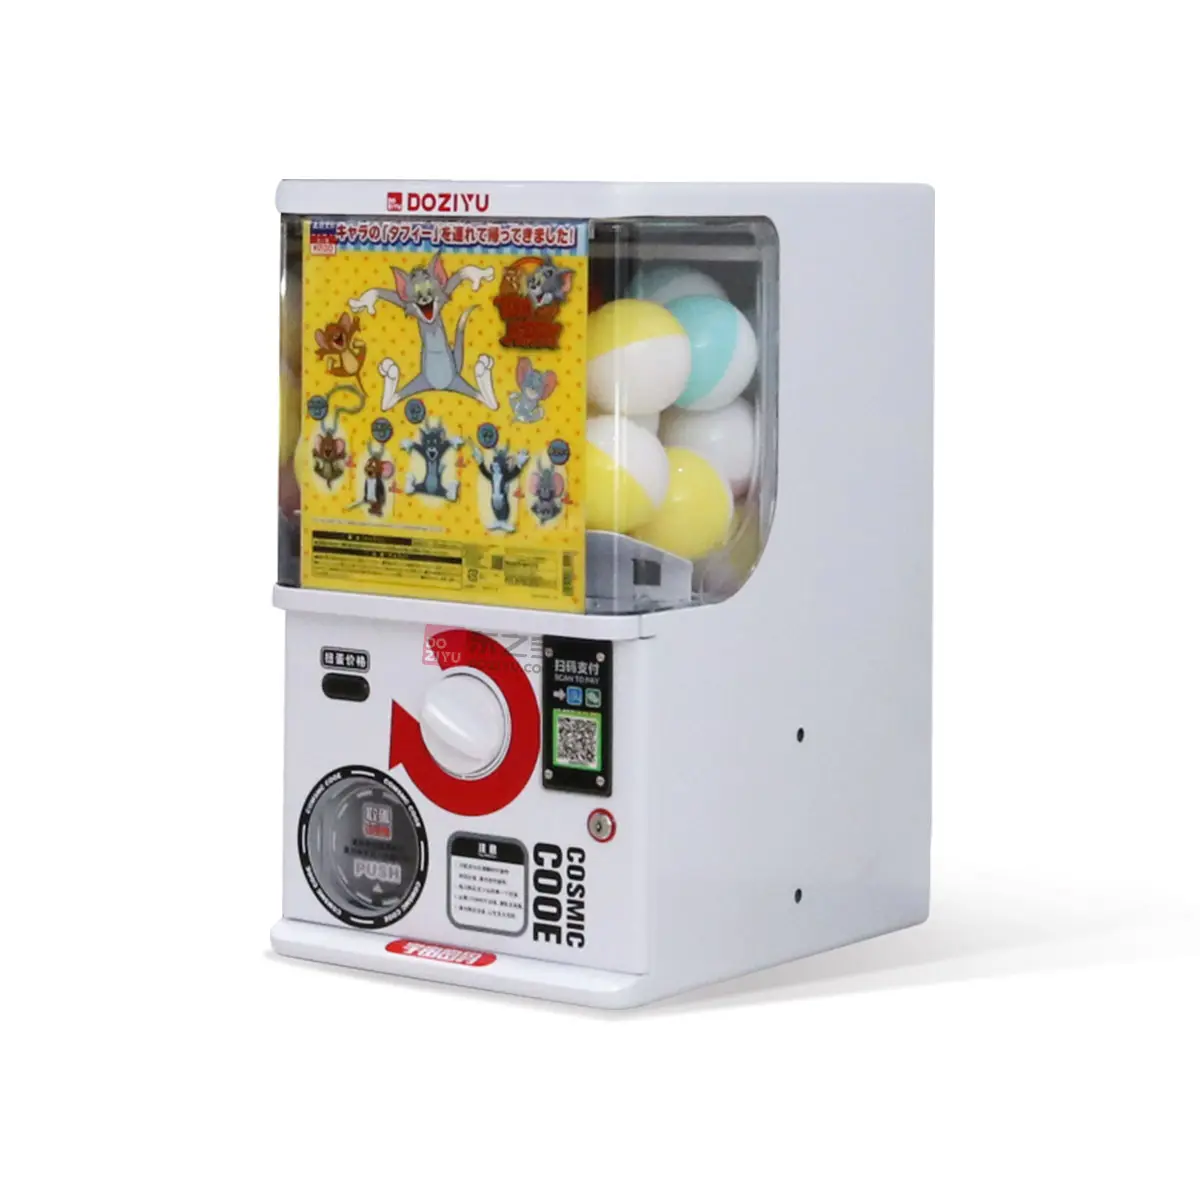 DOZIYU Popular Gachapon Machine in Mall Wholesale Gashapon Capsule Toys from Factory Support OEM